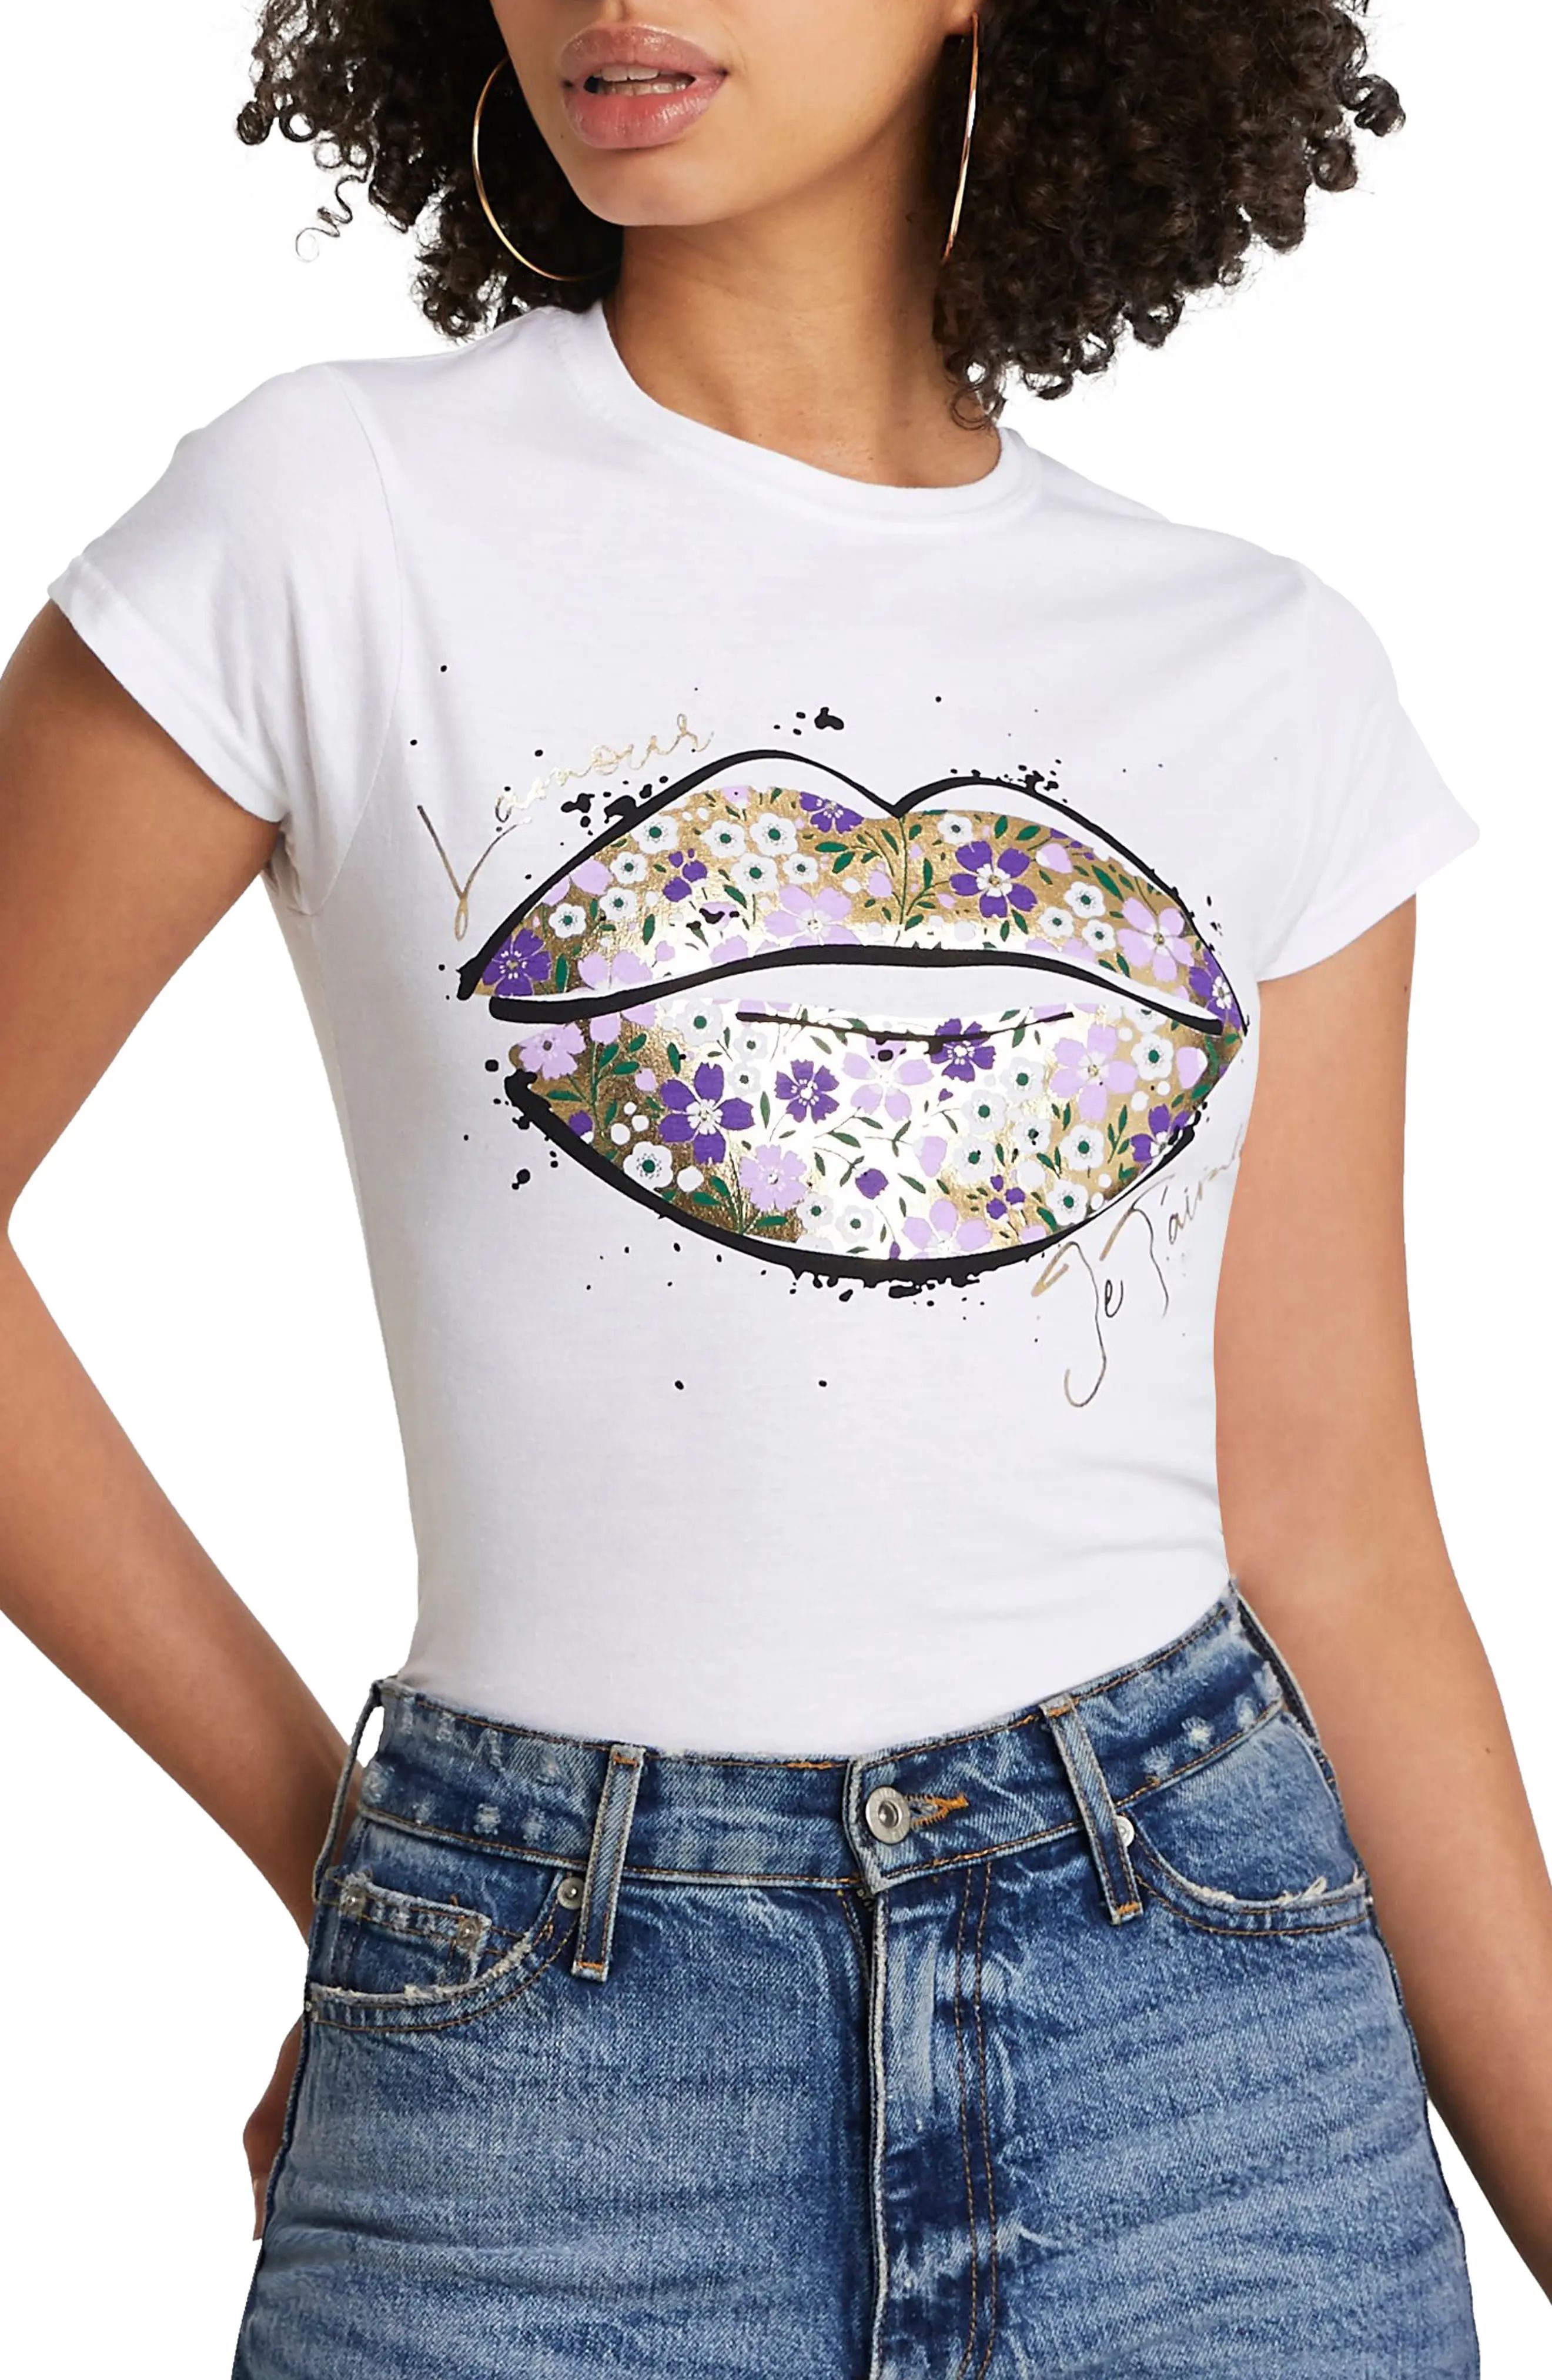 Women's River Island Women's Floral Lips Graphic Tee, Size 4 US - White | Nordstrom